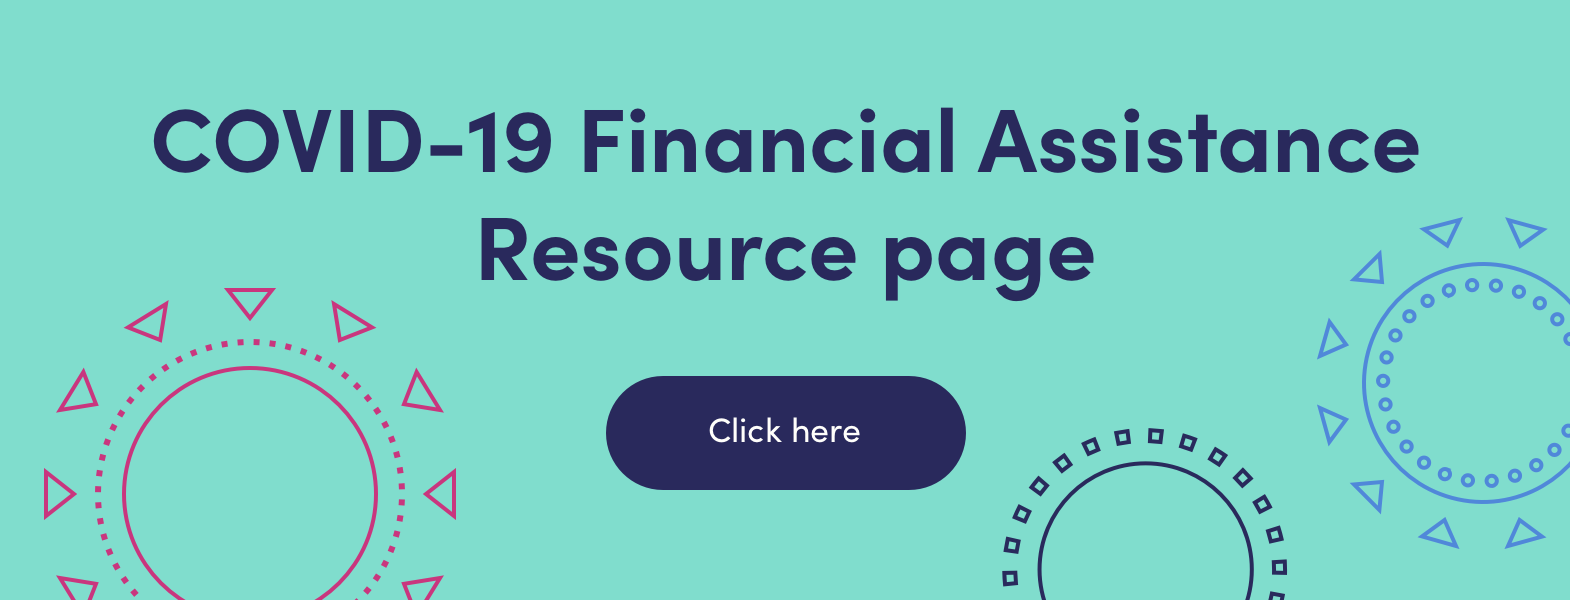 COVID-19 financial assistance resource page